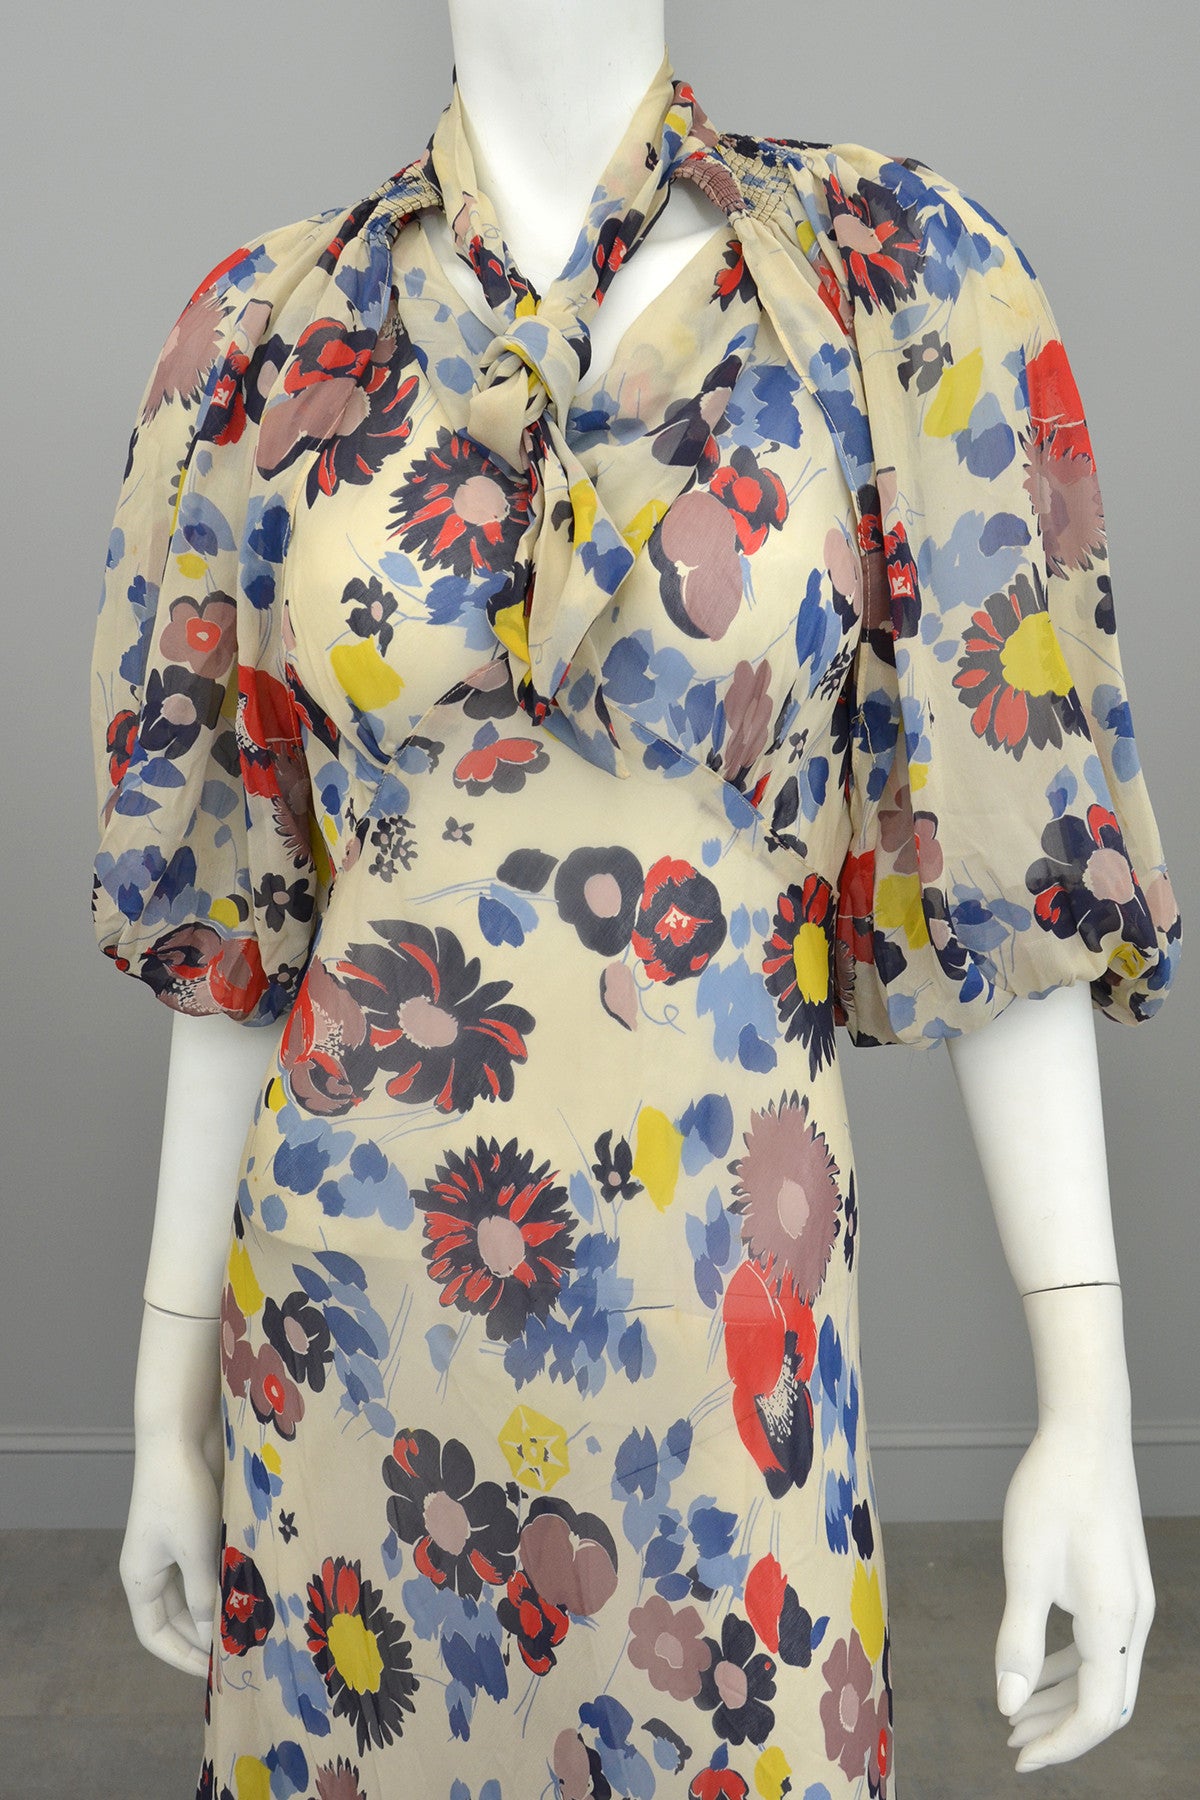 1930s Floral Print Silk Chiffon Vintage Gown and Butterfly Wing Shrug / Bolero